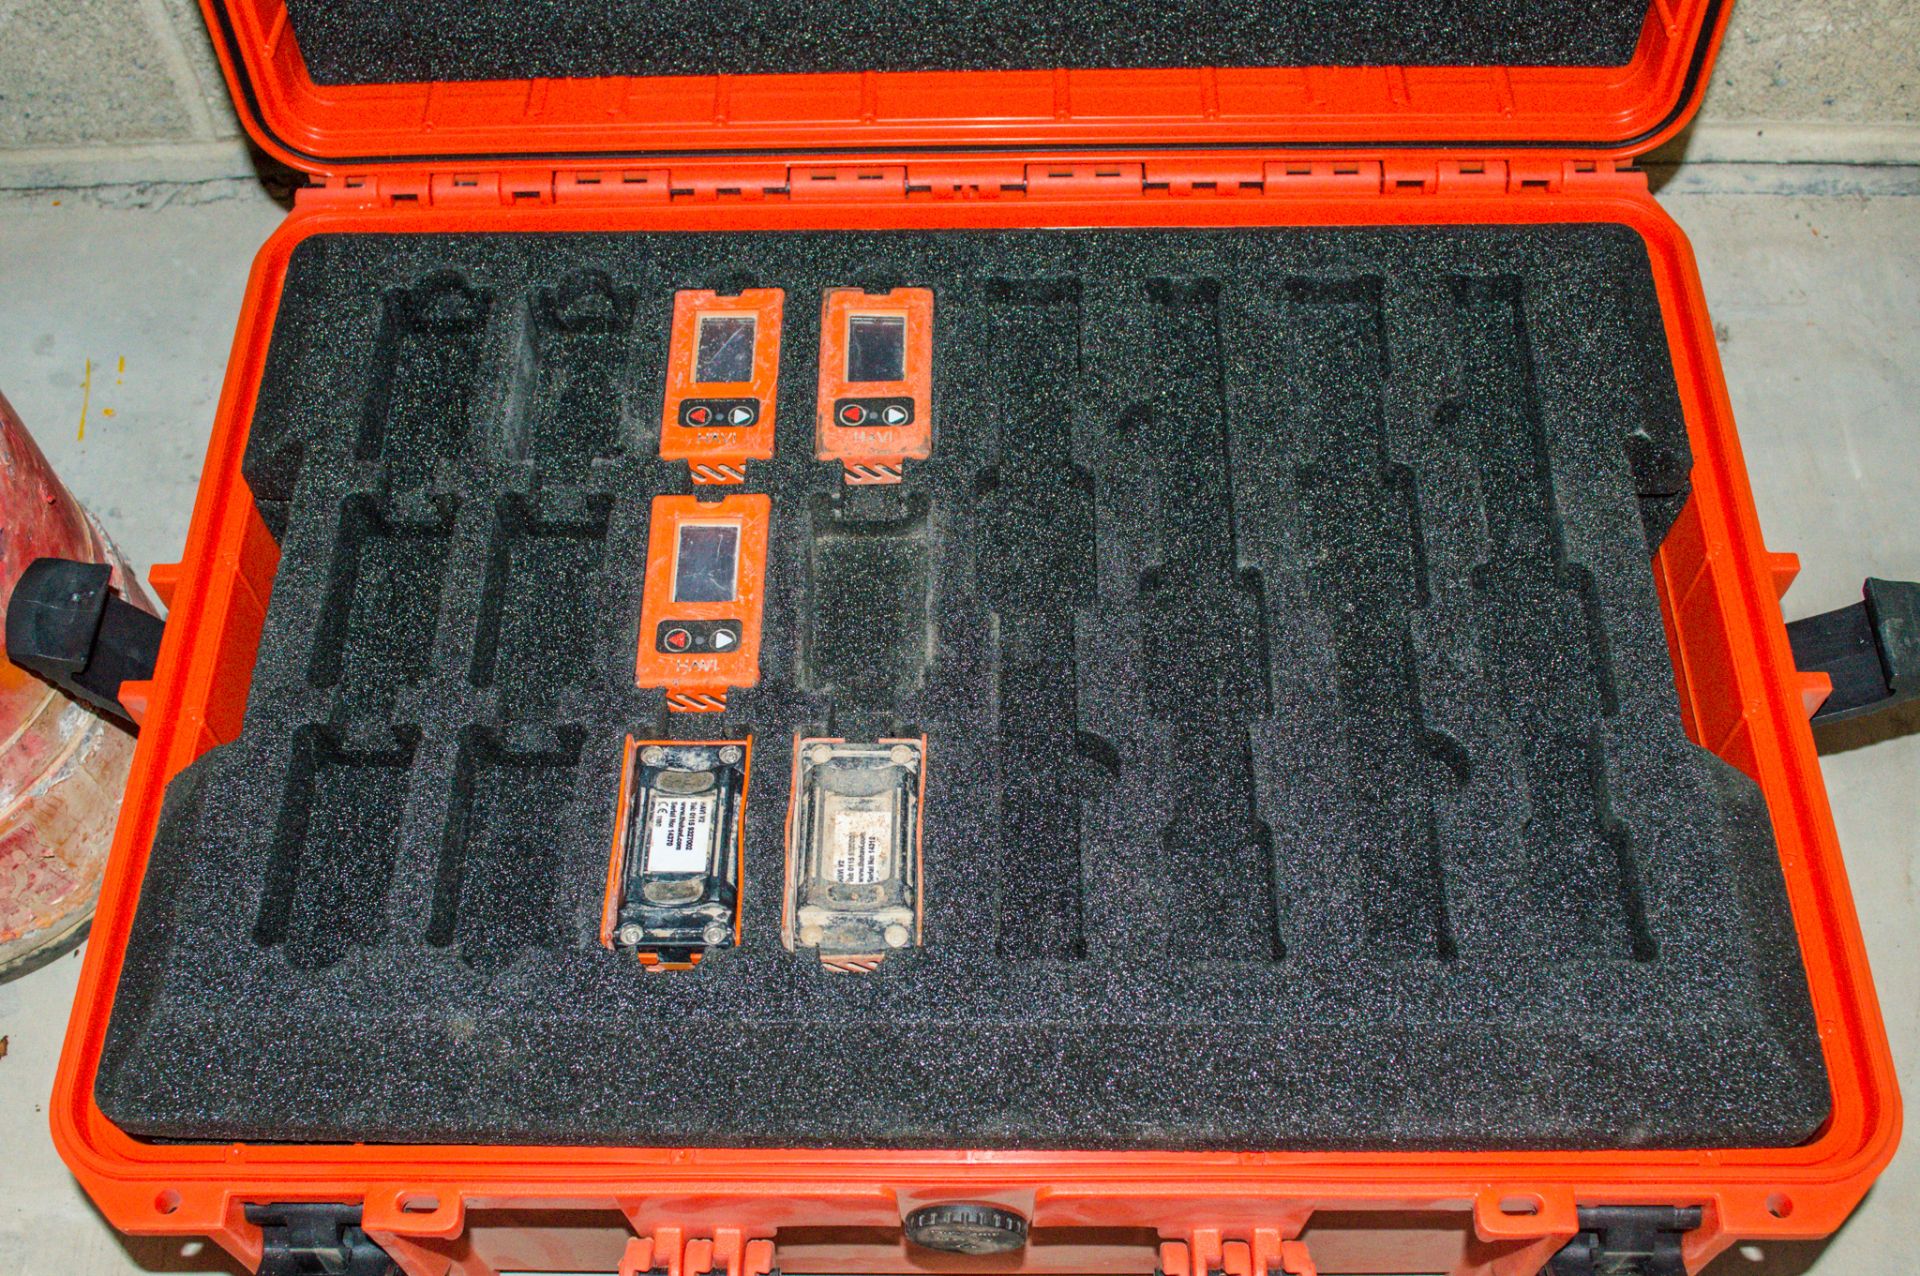 Havi Pack vibration hire kit c/w tool sensors & carry case ** No watches or charger **